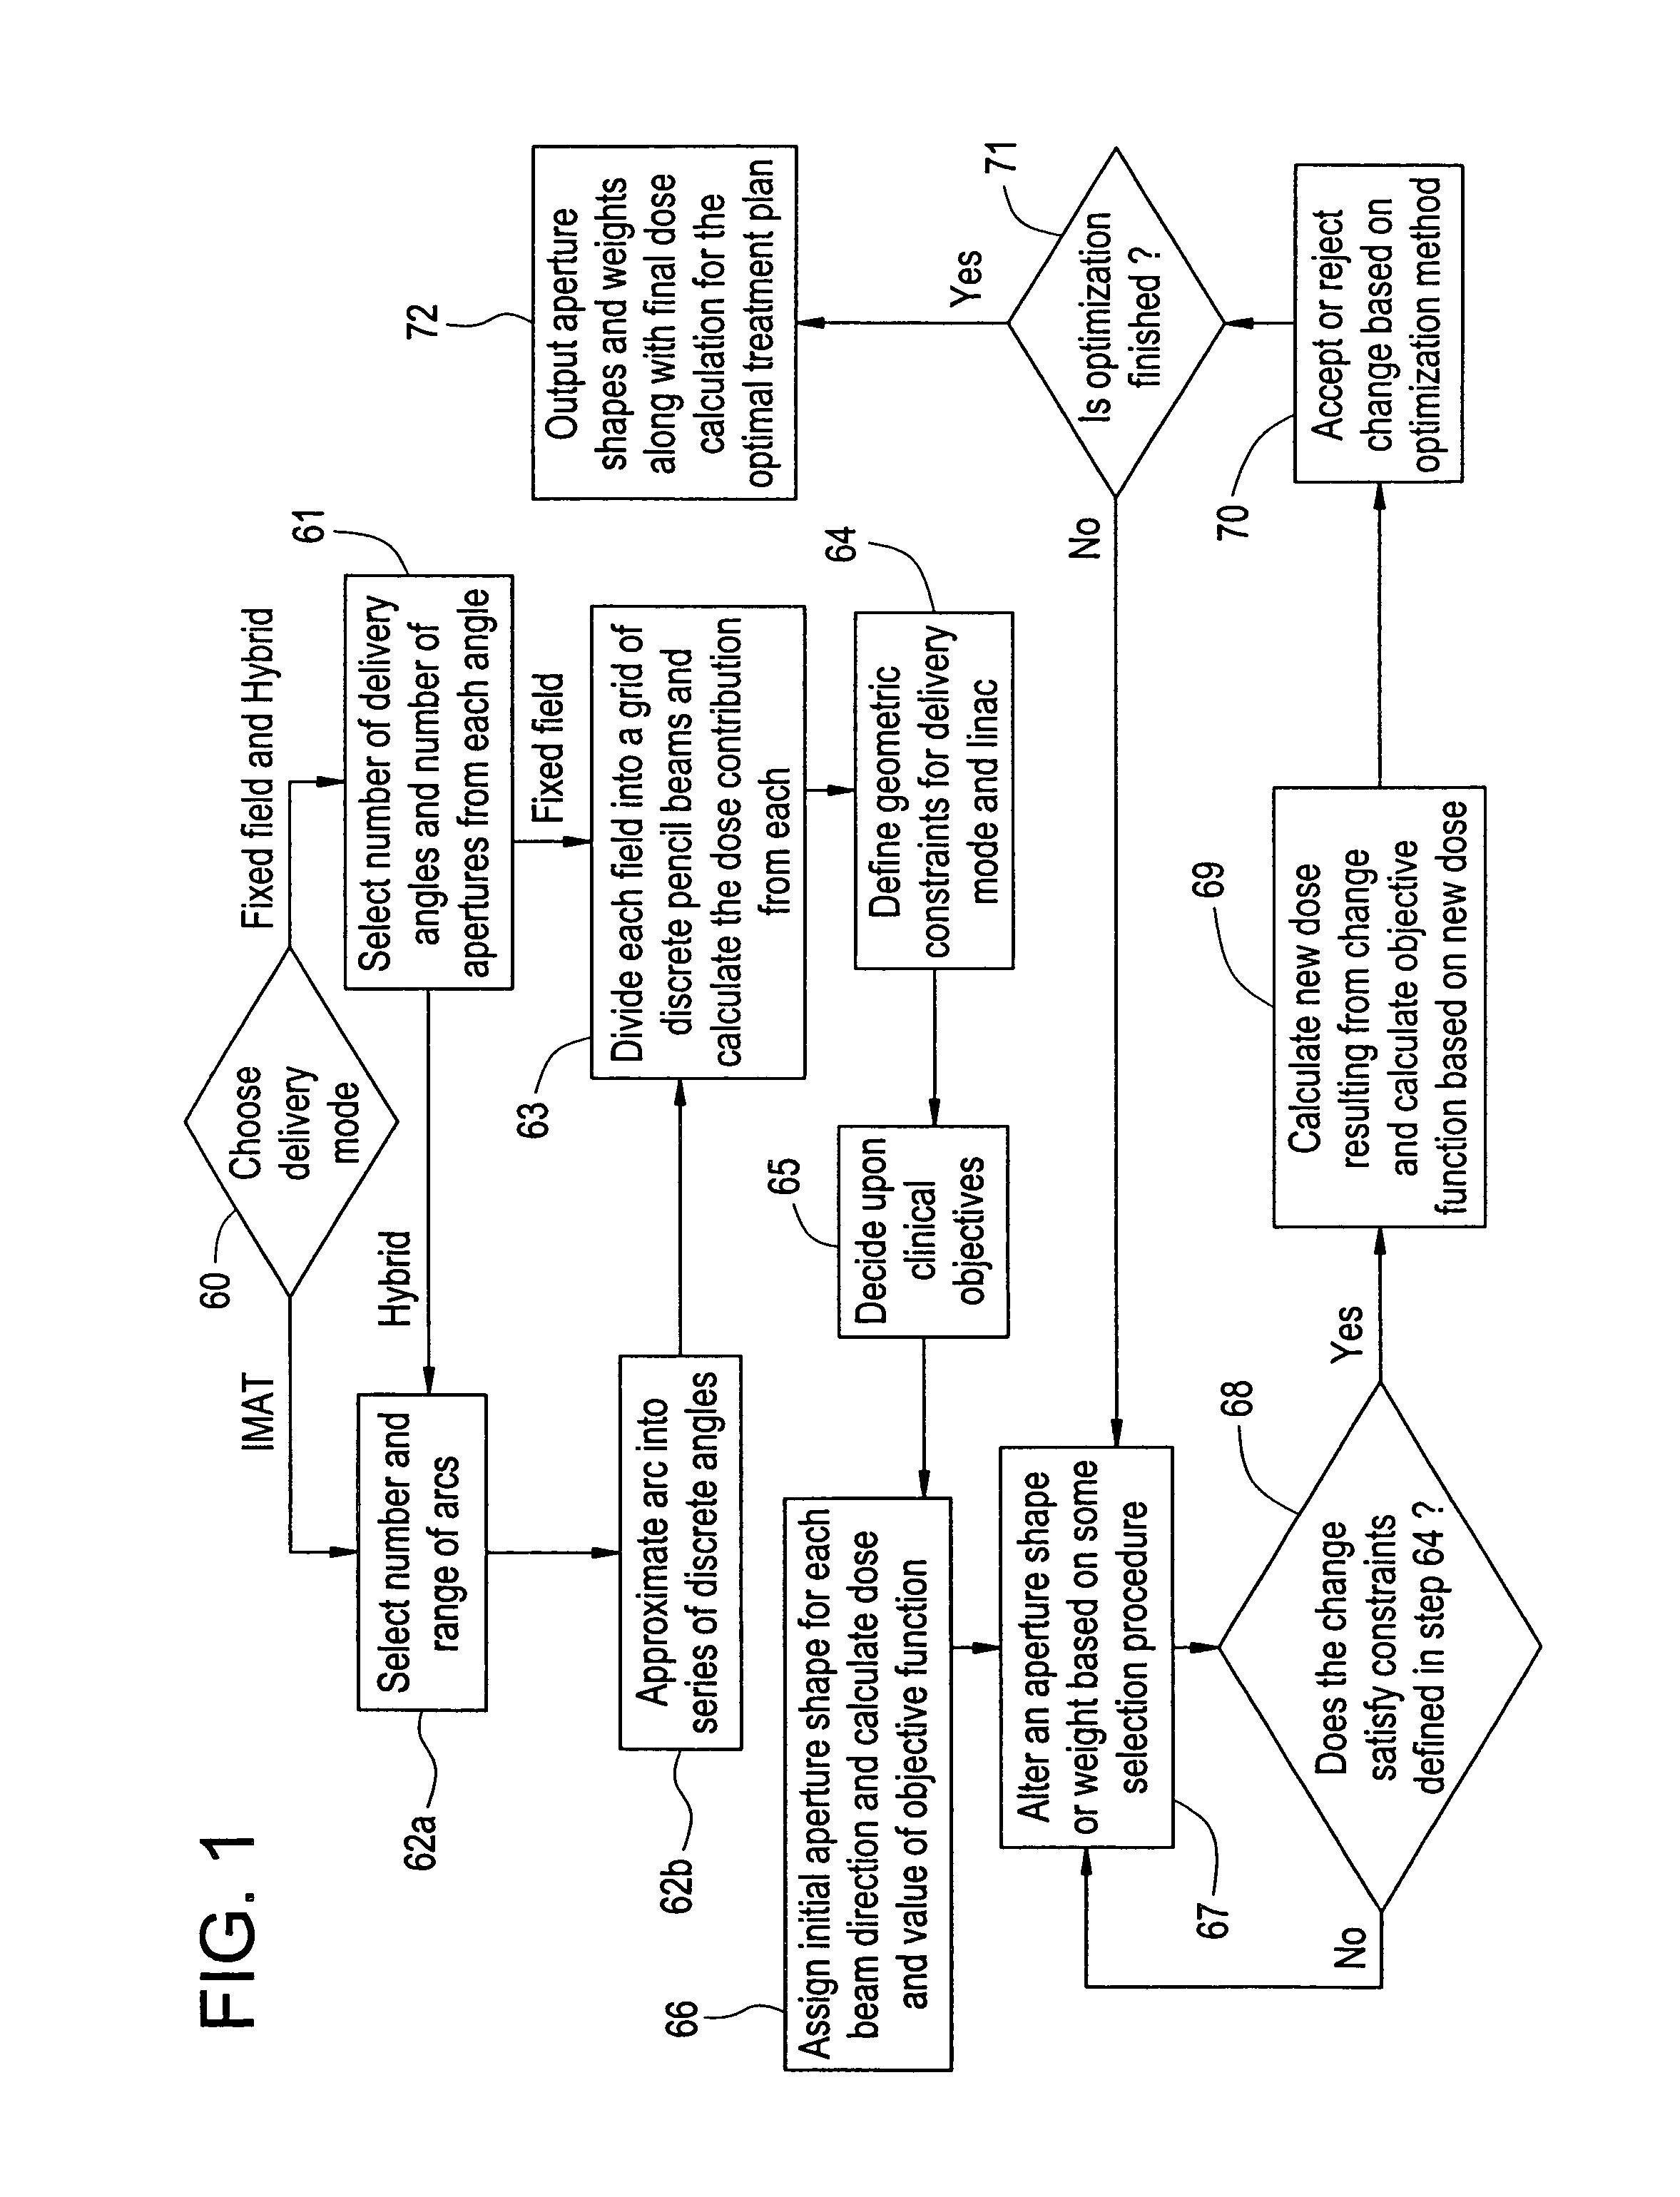 Method for the planning and delivery of radiation therapy